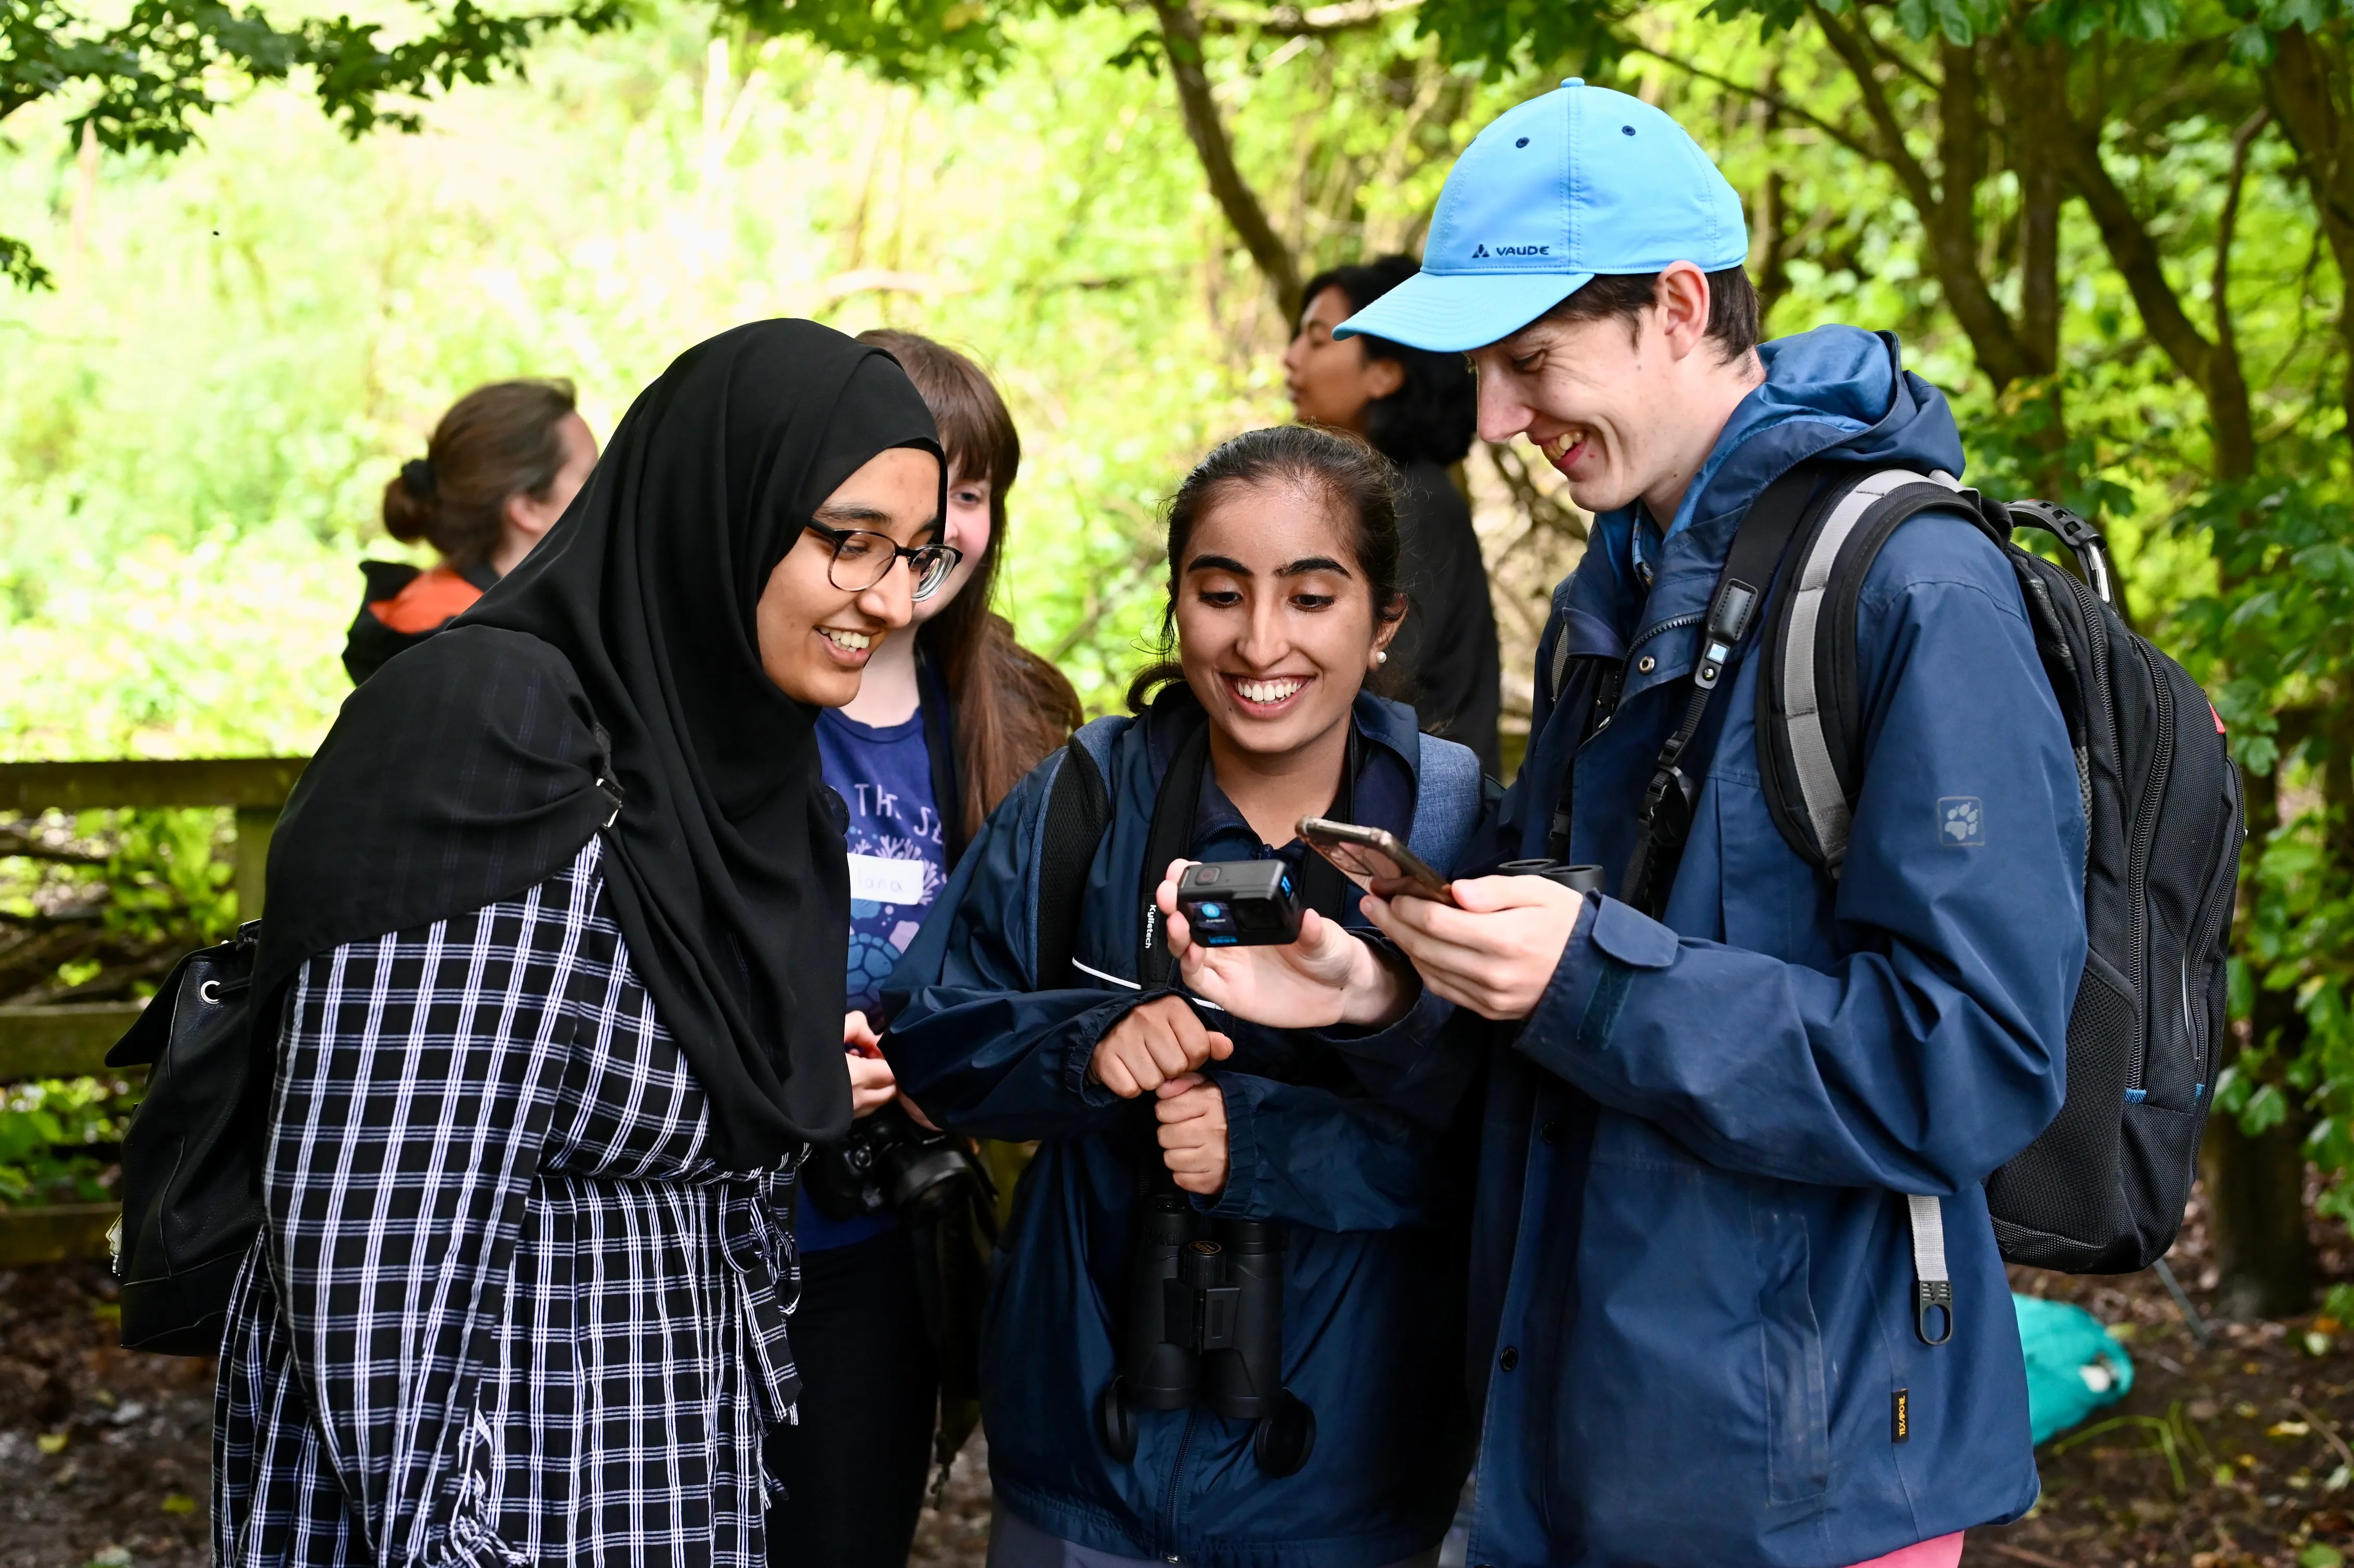 Young people checking their camera, working together in the woods.